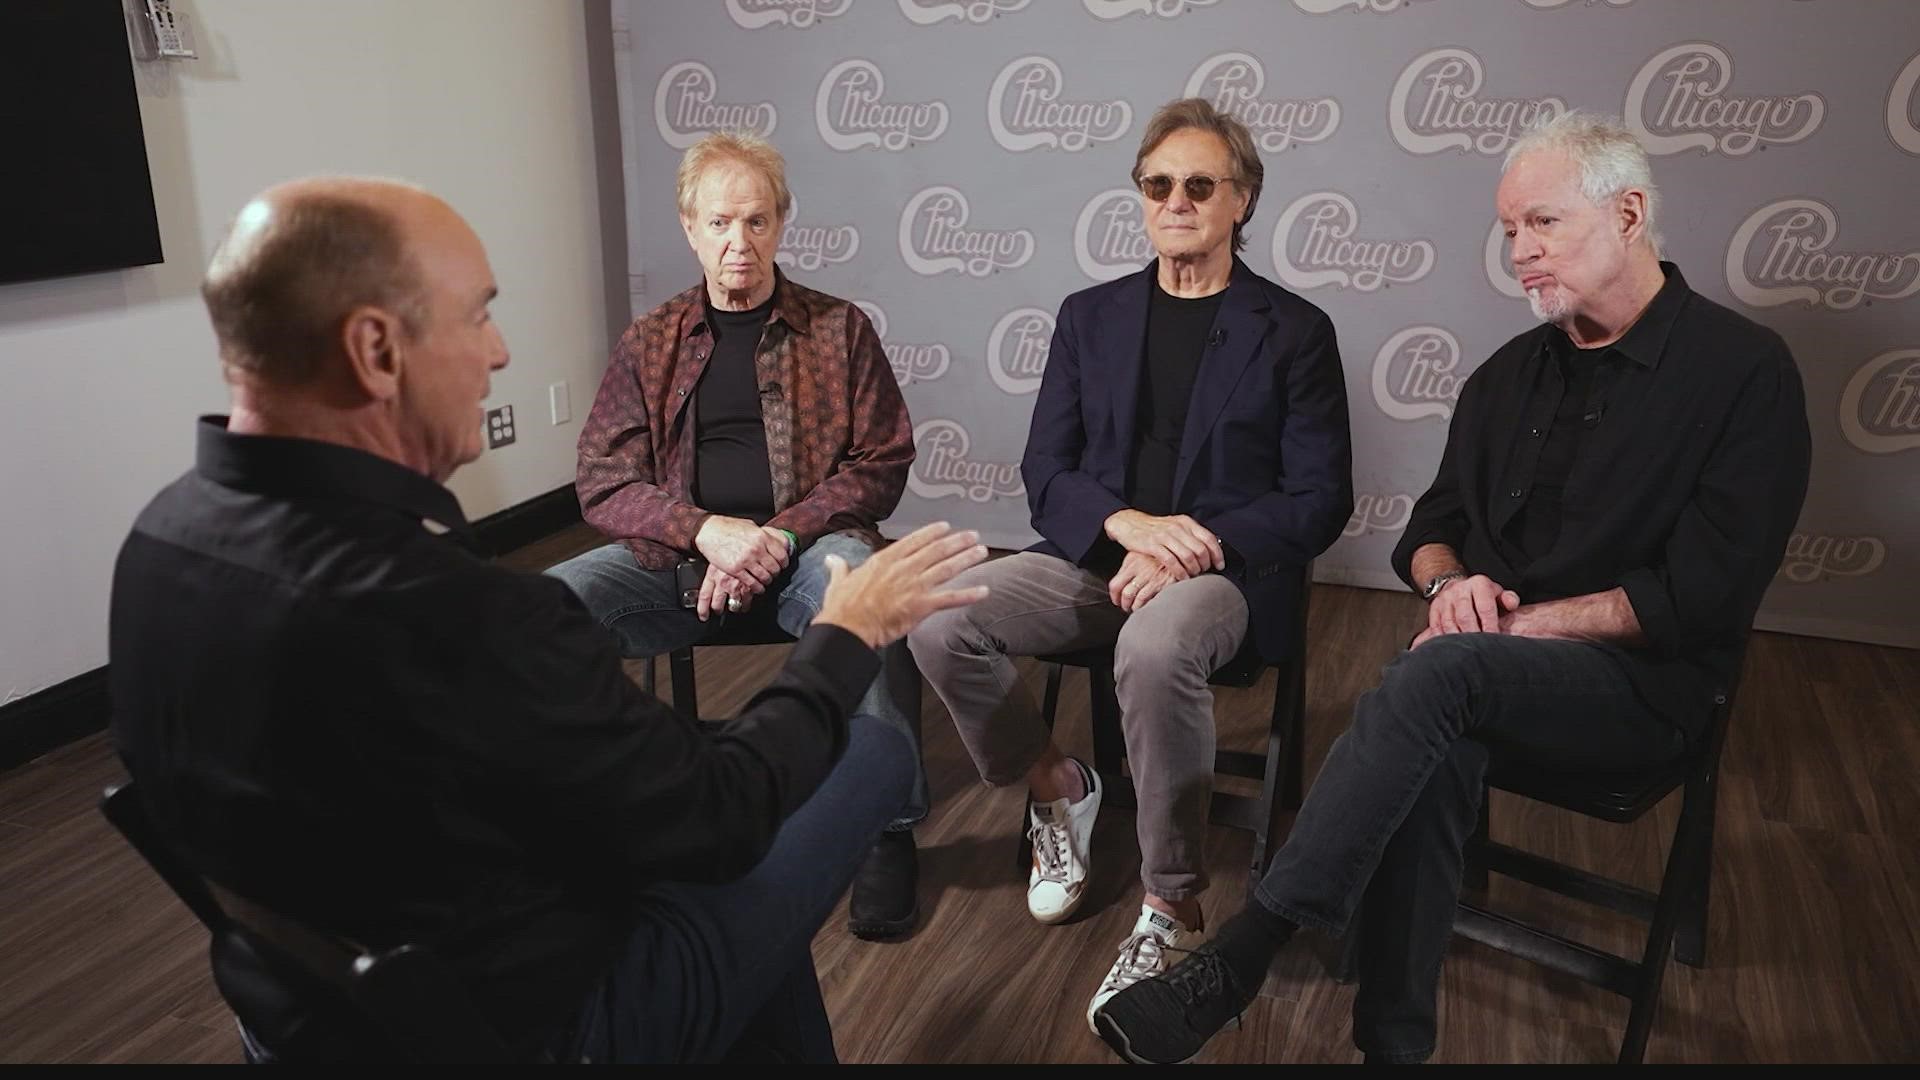 The band Chicago performed at Ruoff Music Center in Noblesville last month and sat down with Chuck before the before the show.